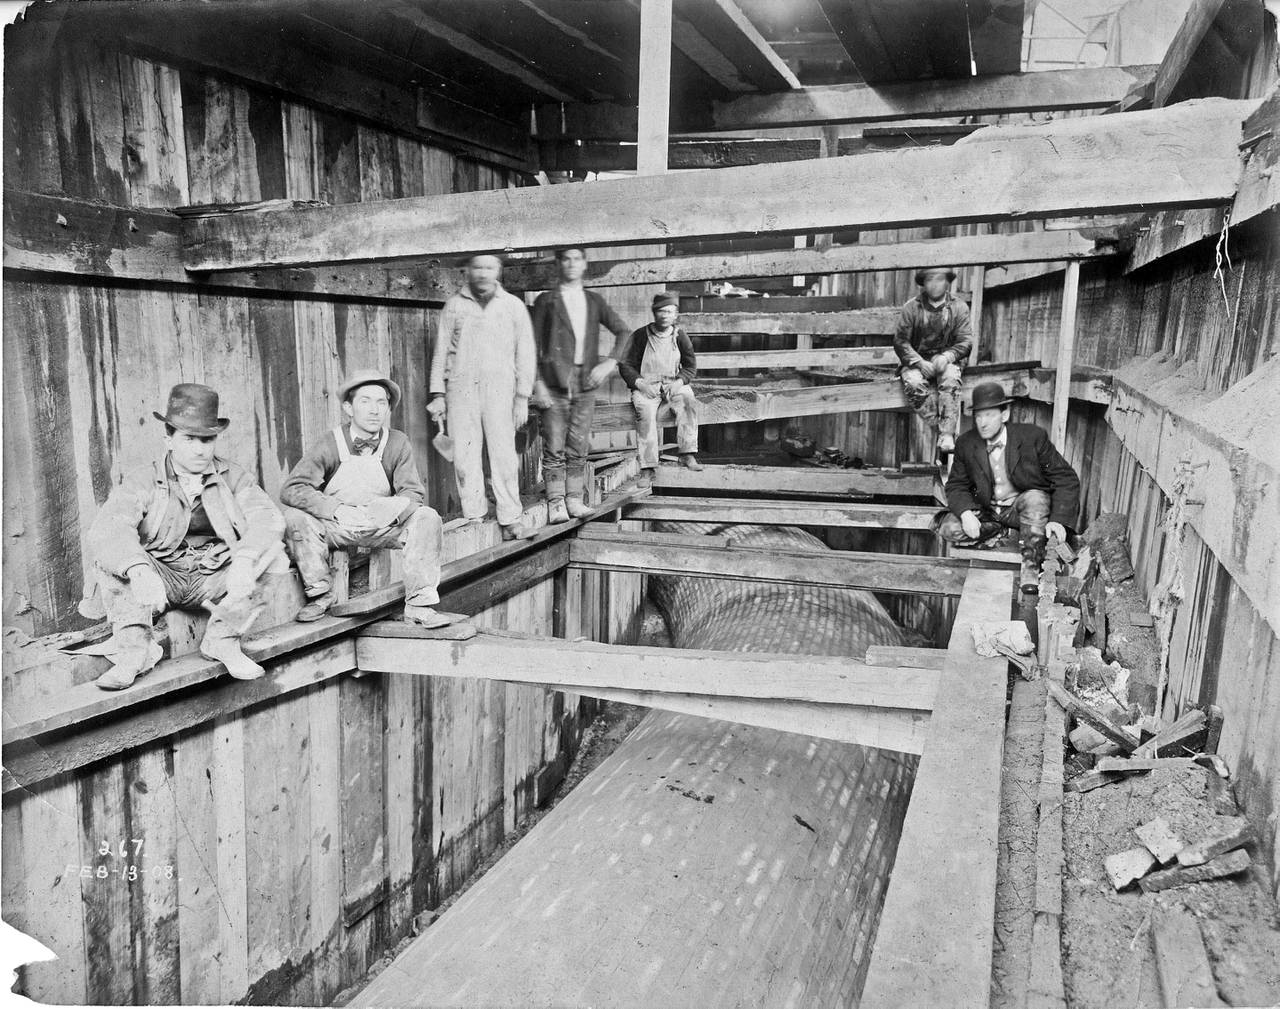 An archived black and white photograph of people sitting on underground scaffolding above a large water pipe.